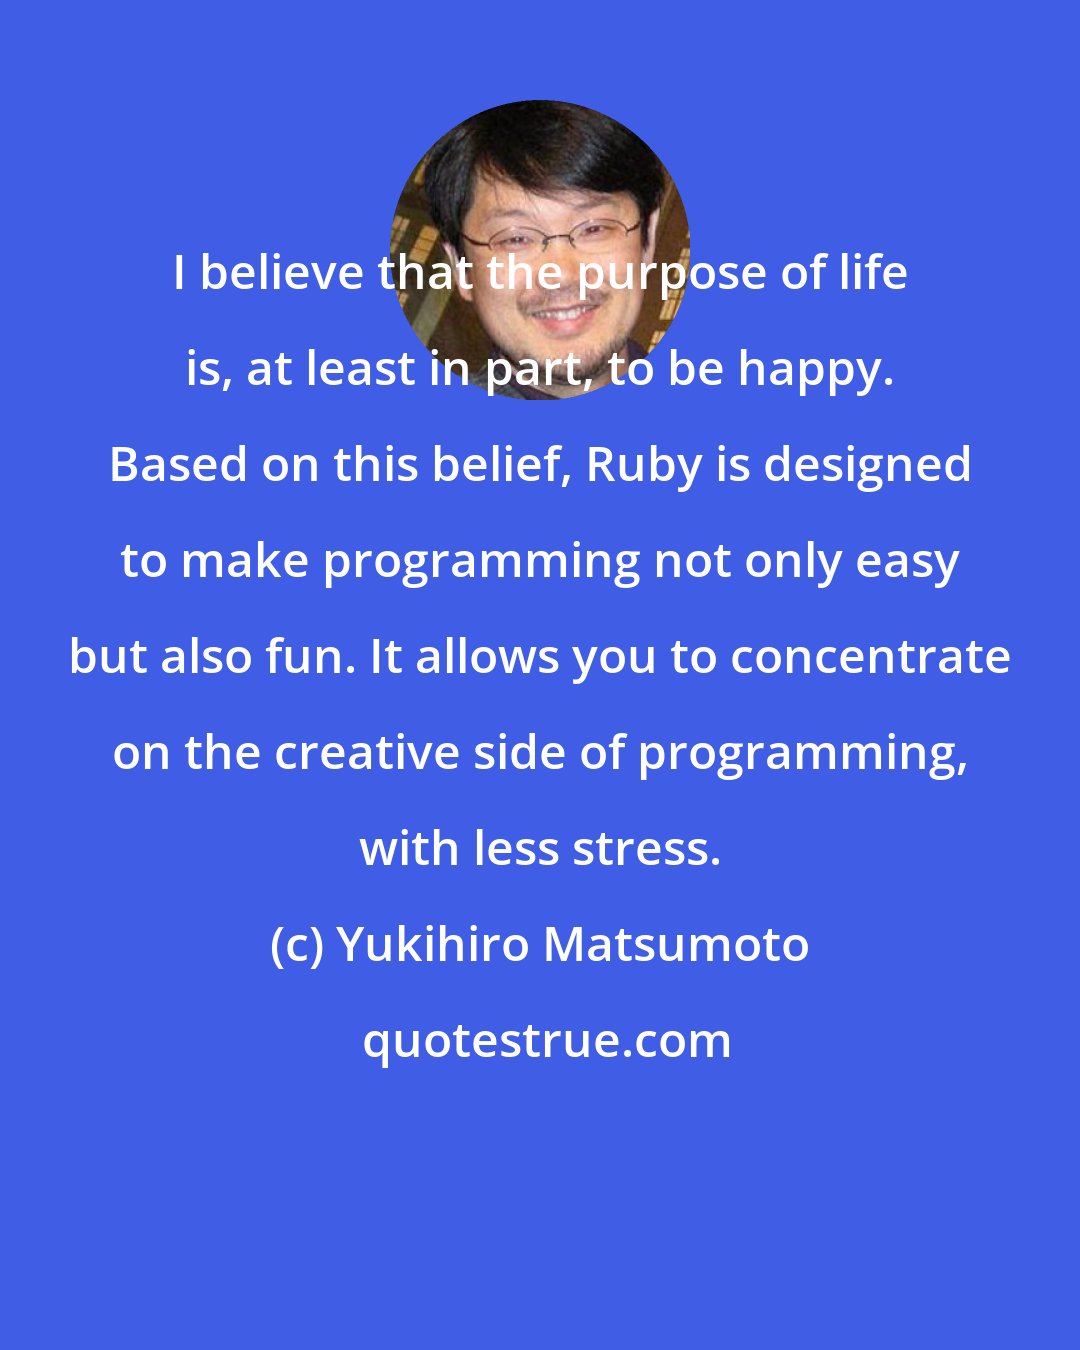 Yukihiro Matsumoto: I believe that the purpose of life is, at least in part, to be happy. Based on this belief, Ruby is designed to make programming not only easy but also fun. It allows you to concentrate on the creative side of programming, with less stress.